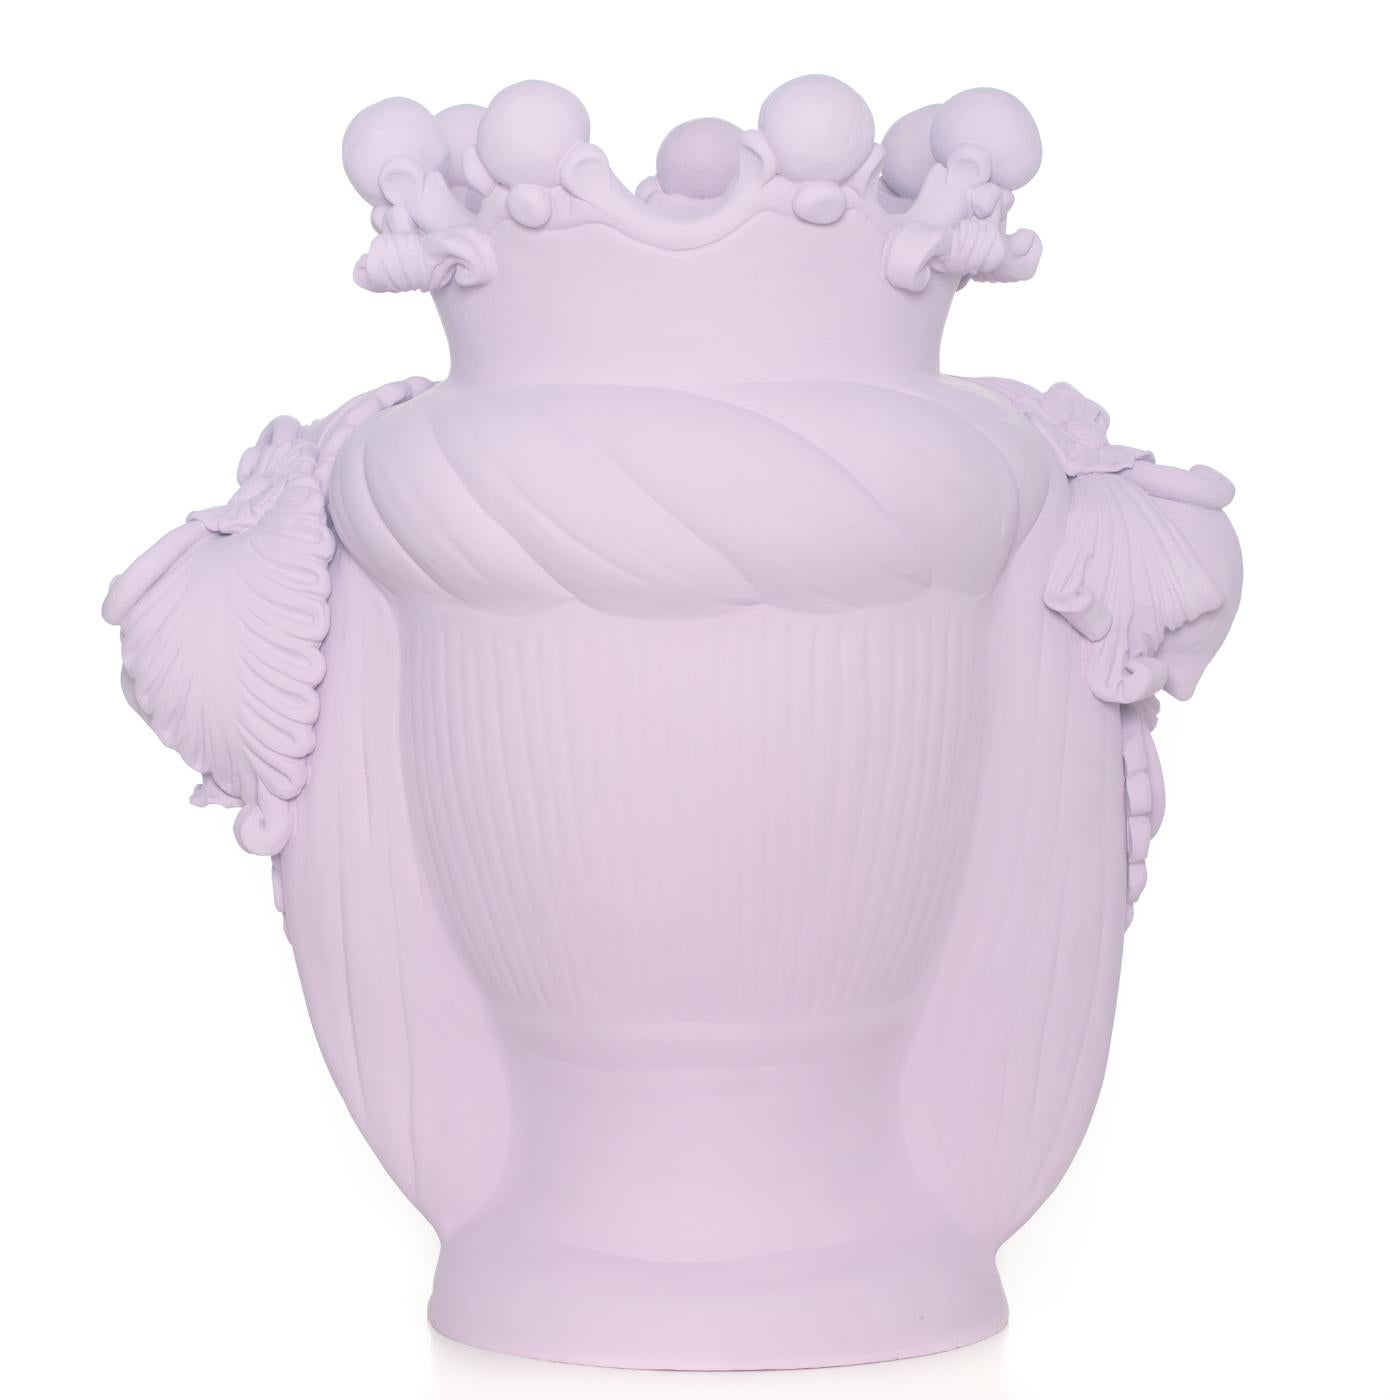 This anthropomorphic vase is made entirely by hand and painted in a antique pink matte monochrome tint, rich in natural pigments and resin binders that provide intense color depth. Only the eyes are glazed so they stand out, emphasizing the beauty